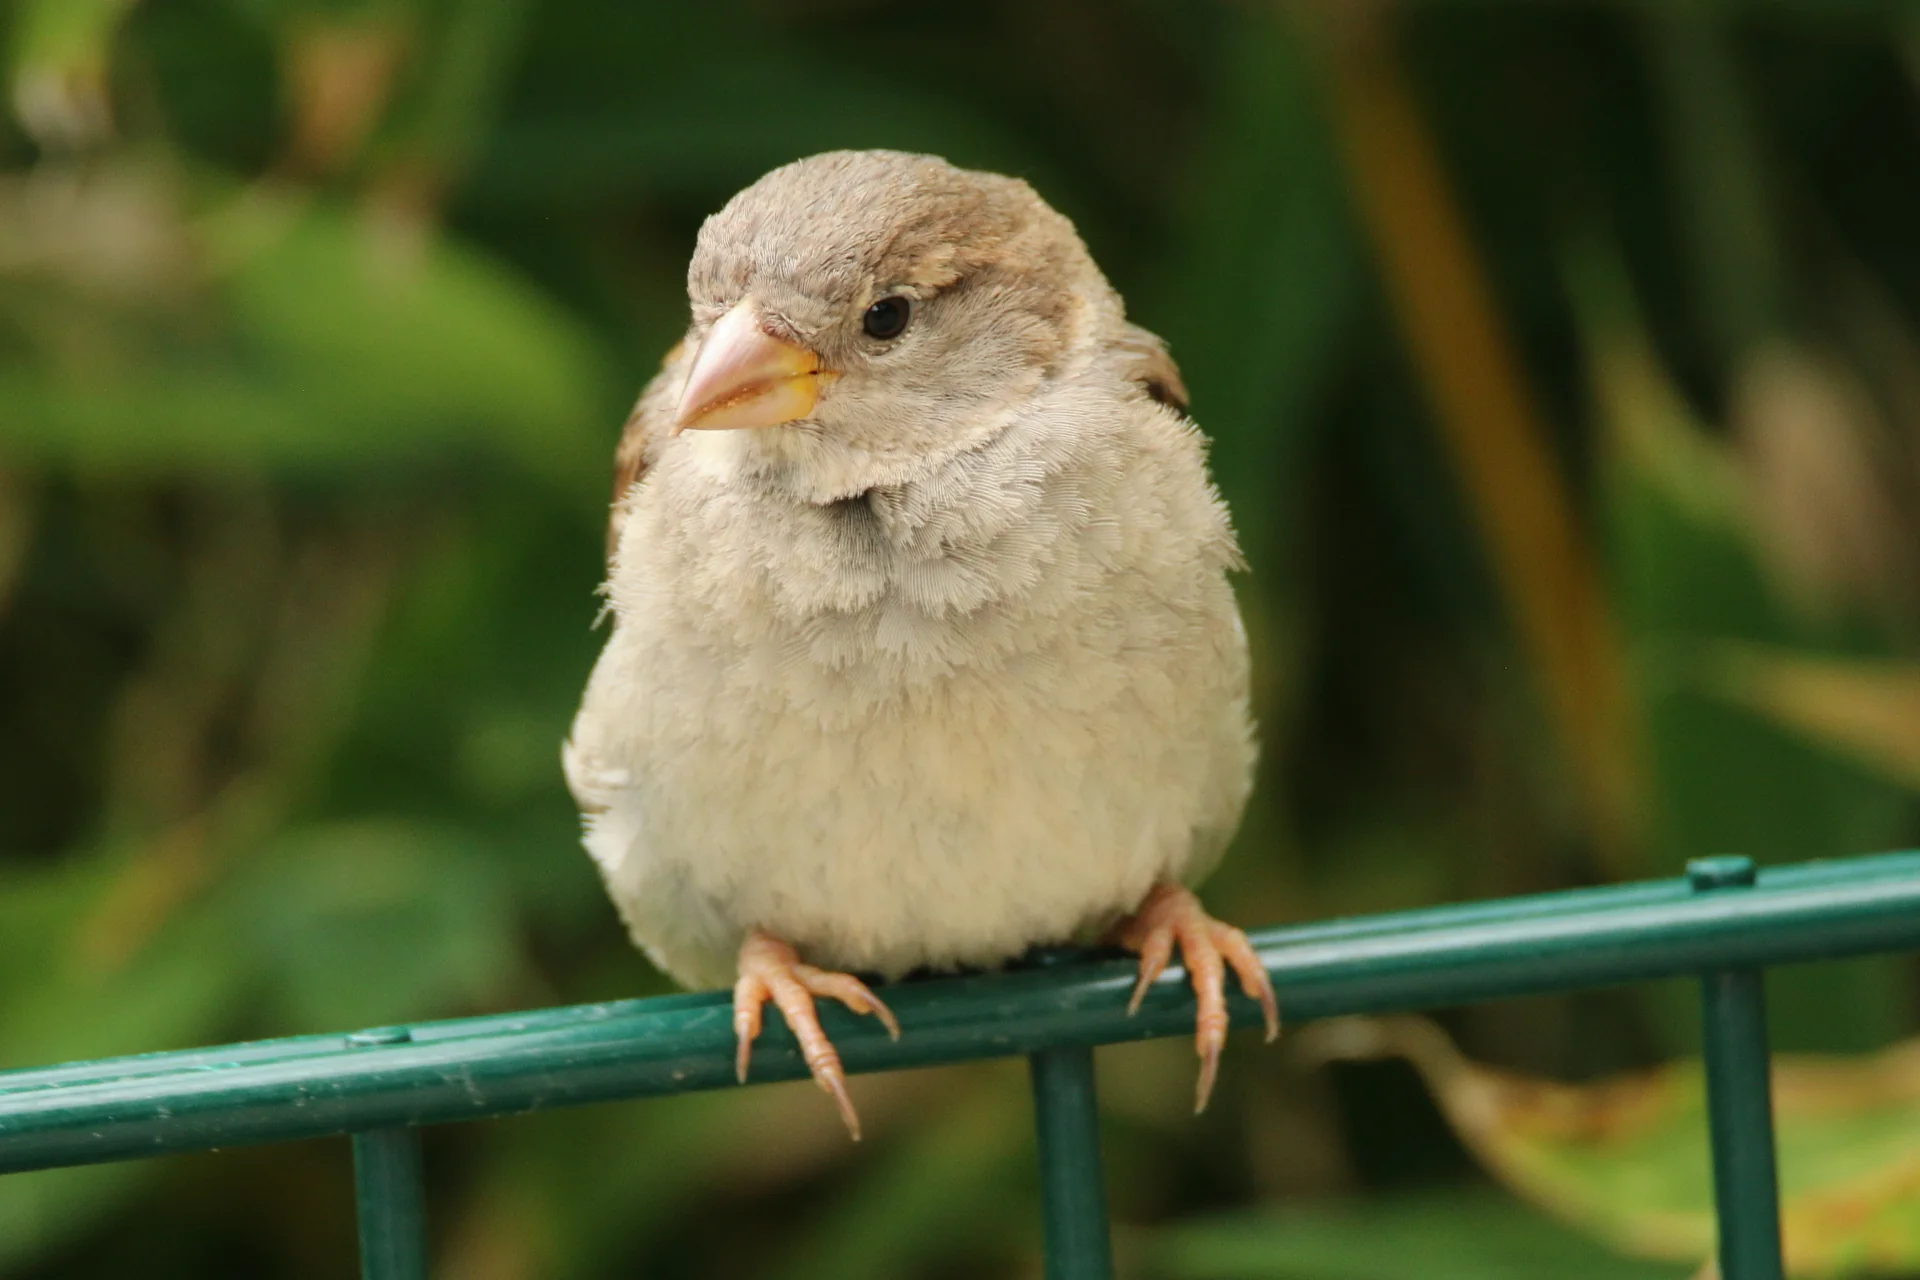 An extremely fluffy sparrow sitting on a green metal fence. Maybe a bit fat from all the visitors throwing food at them but let's pretend it's all feathers!